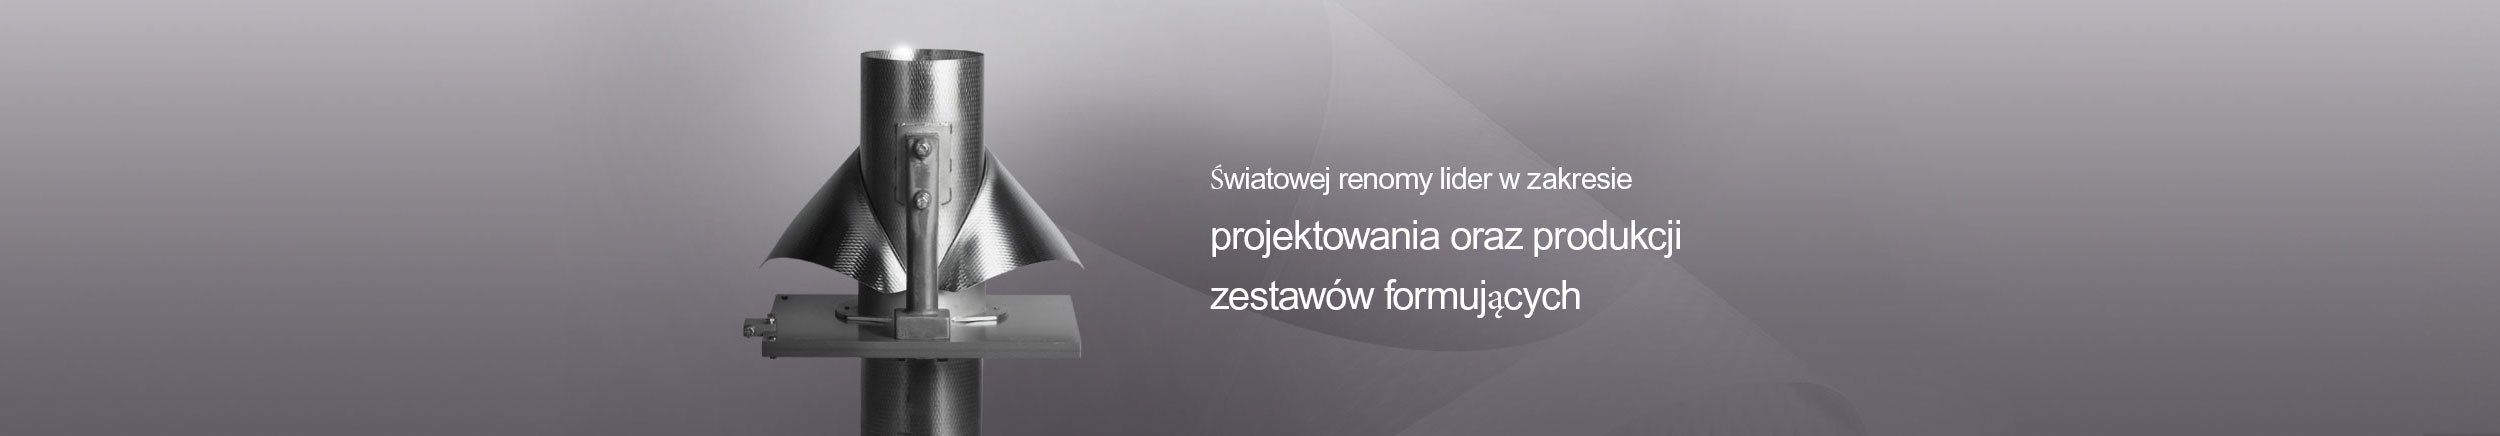 Poland - Kenray Forming, Forming Sets, VFFS, Packaging